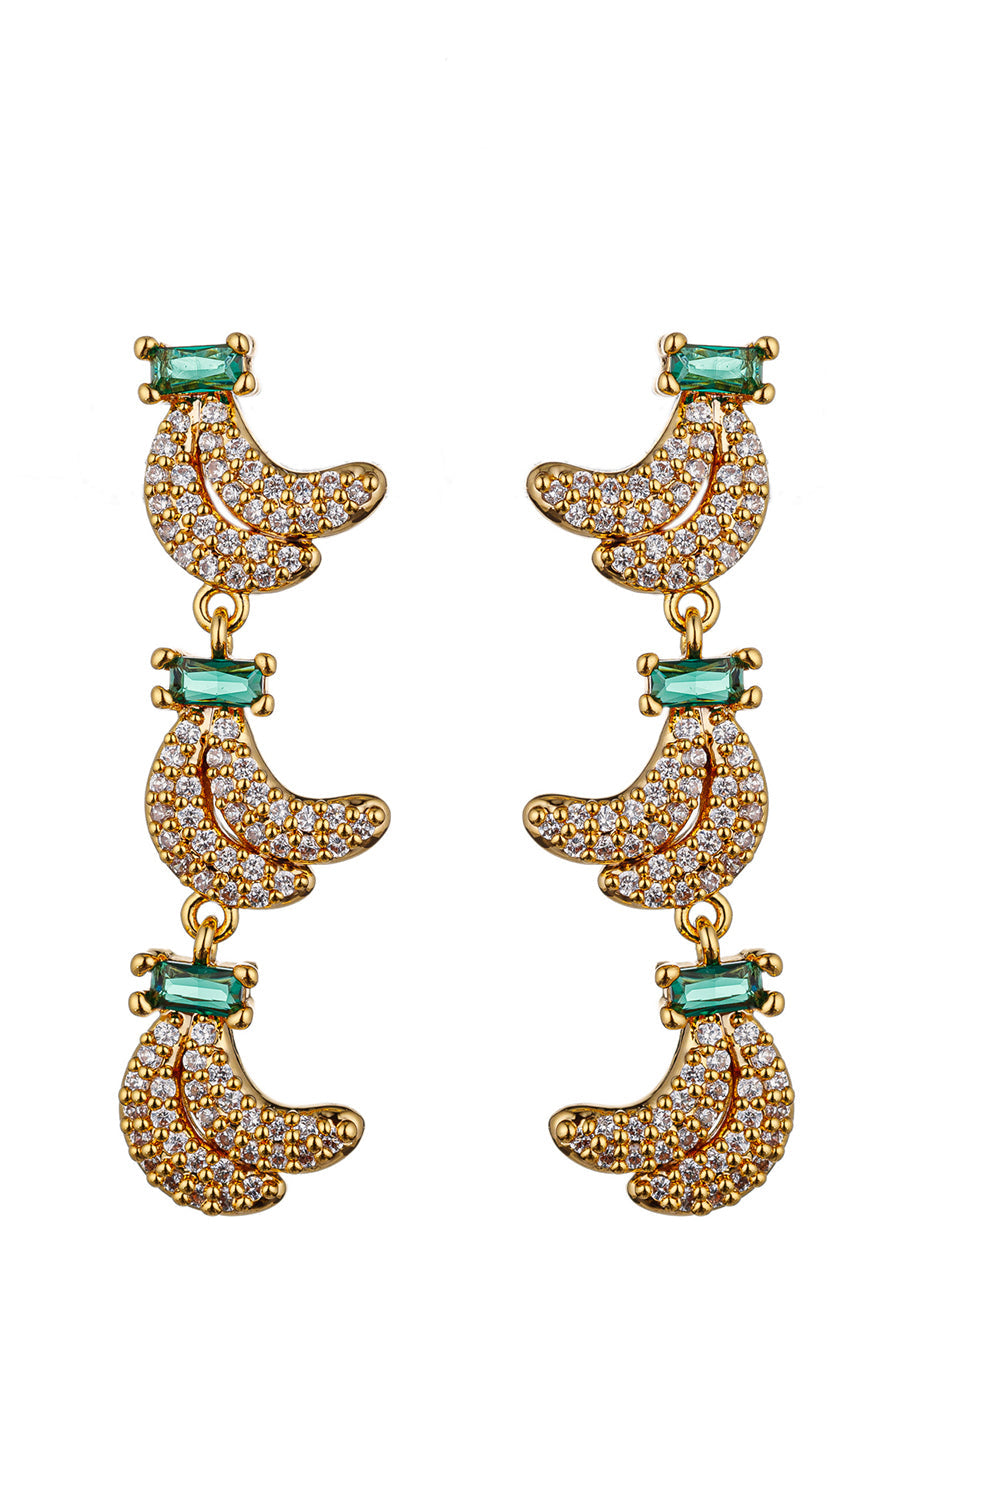 Add a playful touch to your style with these earrings featuring banana-shaped cubic zirconia, a unique and whimsical accessory.